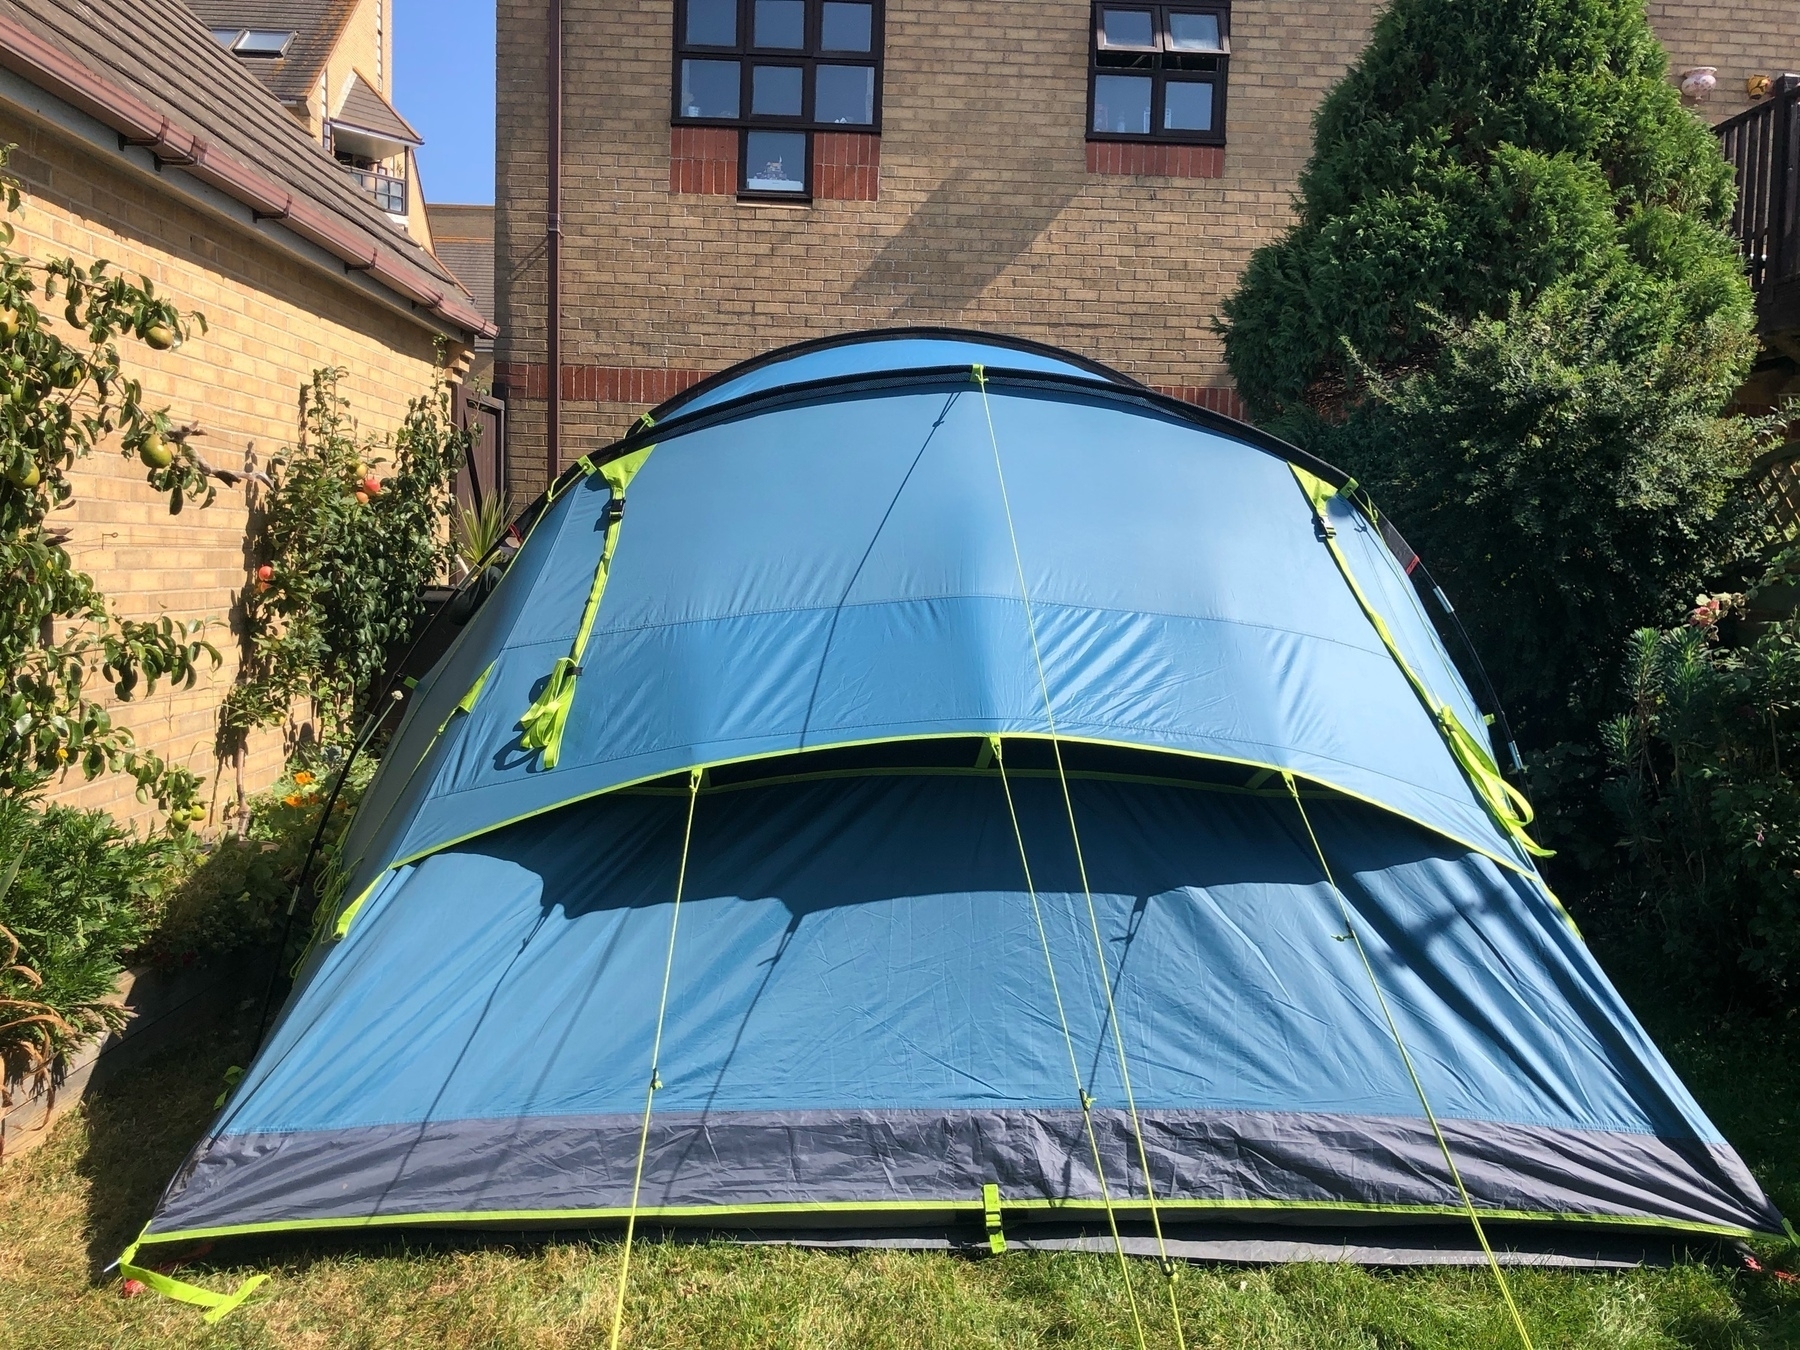 A tent pitched jn a back garden. 